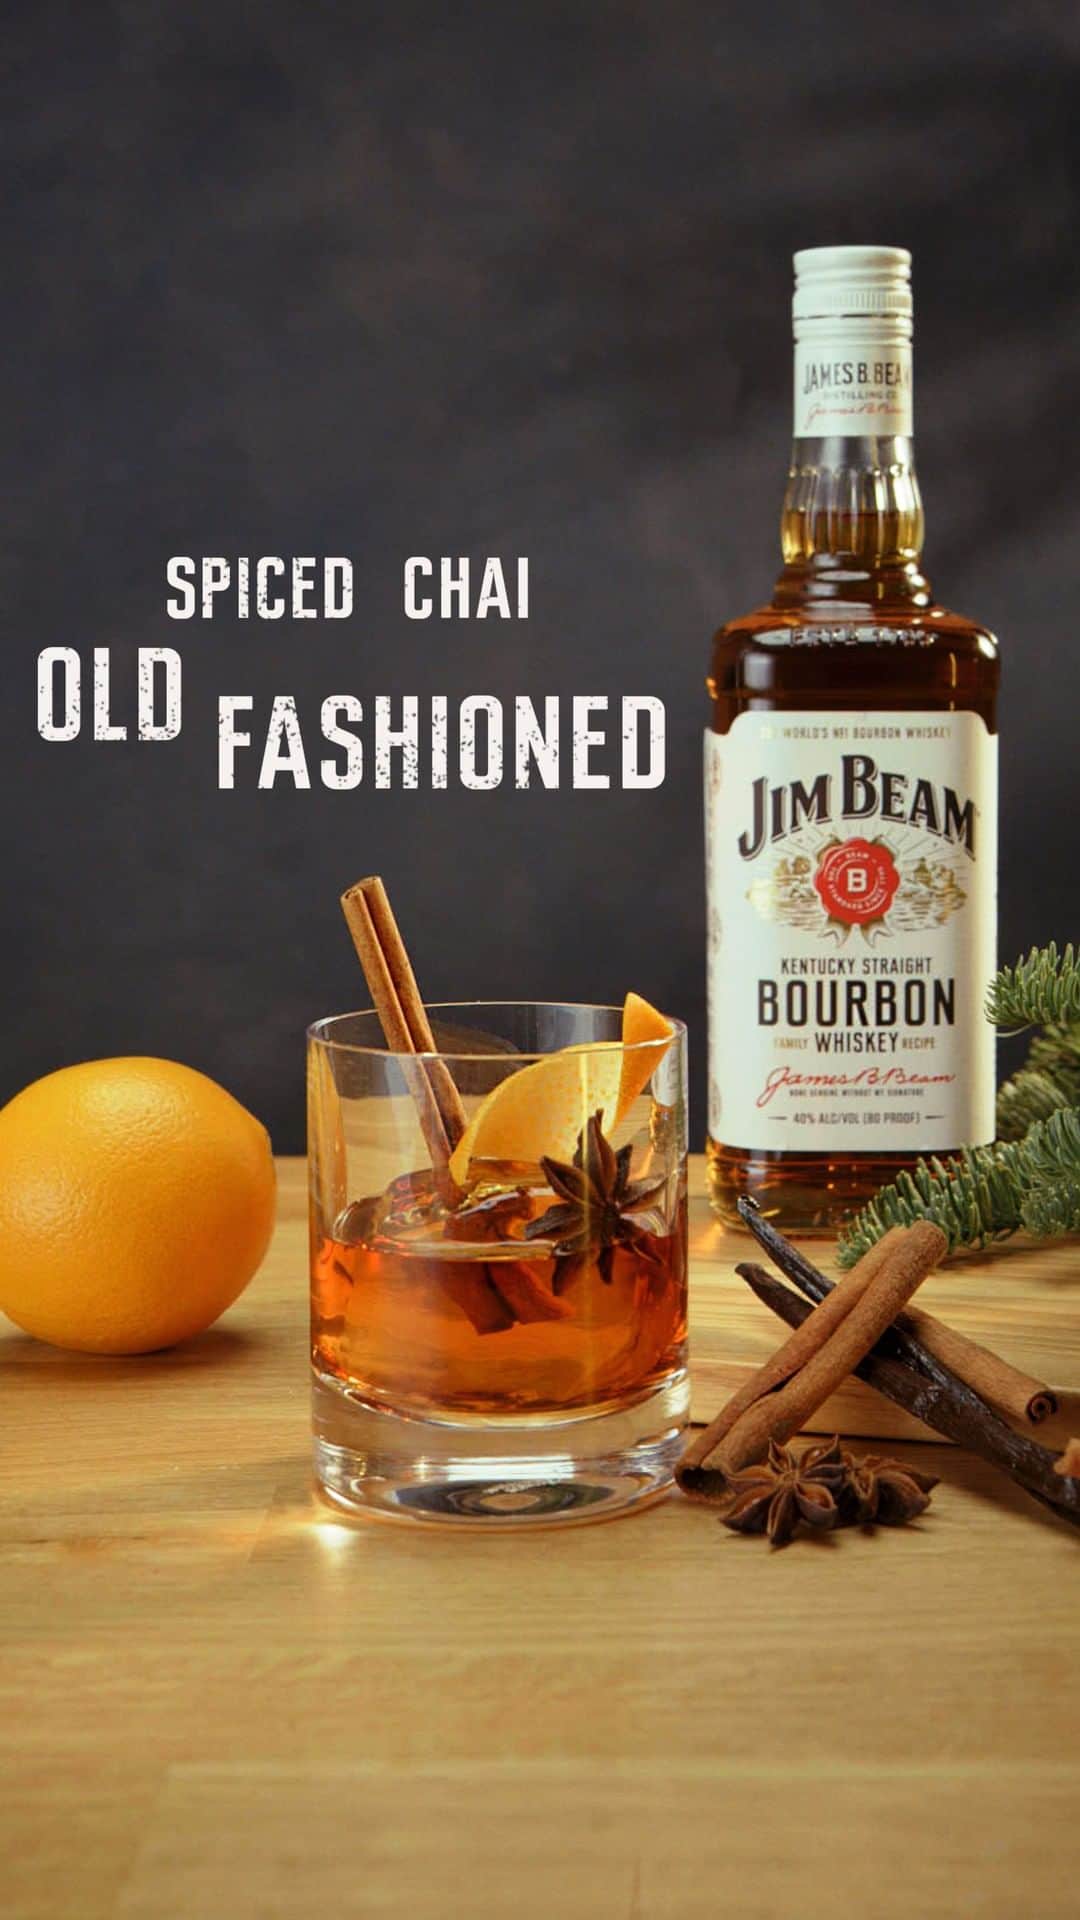 Jim Beamのインスタグラム：「Batch it now, sip it later. This Spiced Chai Old Fashioned is ready when you are.⁣ ___⁣ ⁣ Recipe:⁣ 10-11 Servings⁣ ⁣ 750ml Jim Beam™⁣ 2oz of Simple Syrup⁣ 1 Vanilla Bean⁣ 5-6 Cinnamon Sticks⁣ 10 Cloves⁣ 2 Star Anise⁣ Ginger⁣ Black Walnut Bitters⁣ Water⁣ ⁣ Pour out 6oz of Jim Beam and set aside for future use. Add in 2oz of Simple Syrup. Add 1 Vanilla bean, 5-6 Cinnamon Sticks, 10 Cloves, 2 Star Anise, a few pieces of Ginger into the bottle. Add 12-15 dashes of Black Walnut Bitters. Add 2oz of Water. Shake and chill in freezer overnight. When ready to serve, add 2oz of cocktail over ice, and garnish with Orange peel, Cinnamon Stick and Star Anise.」